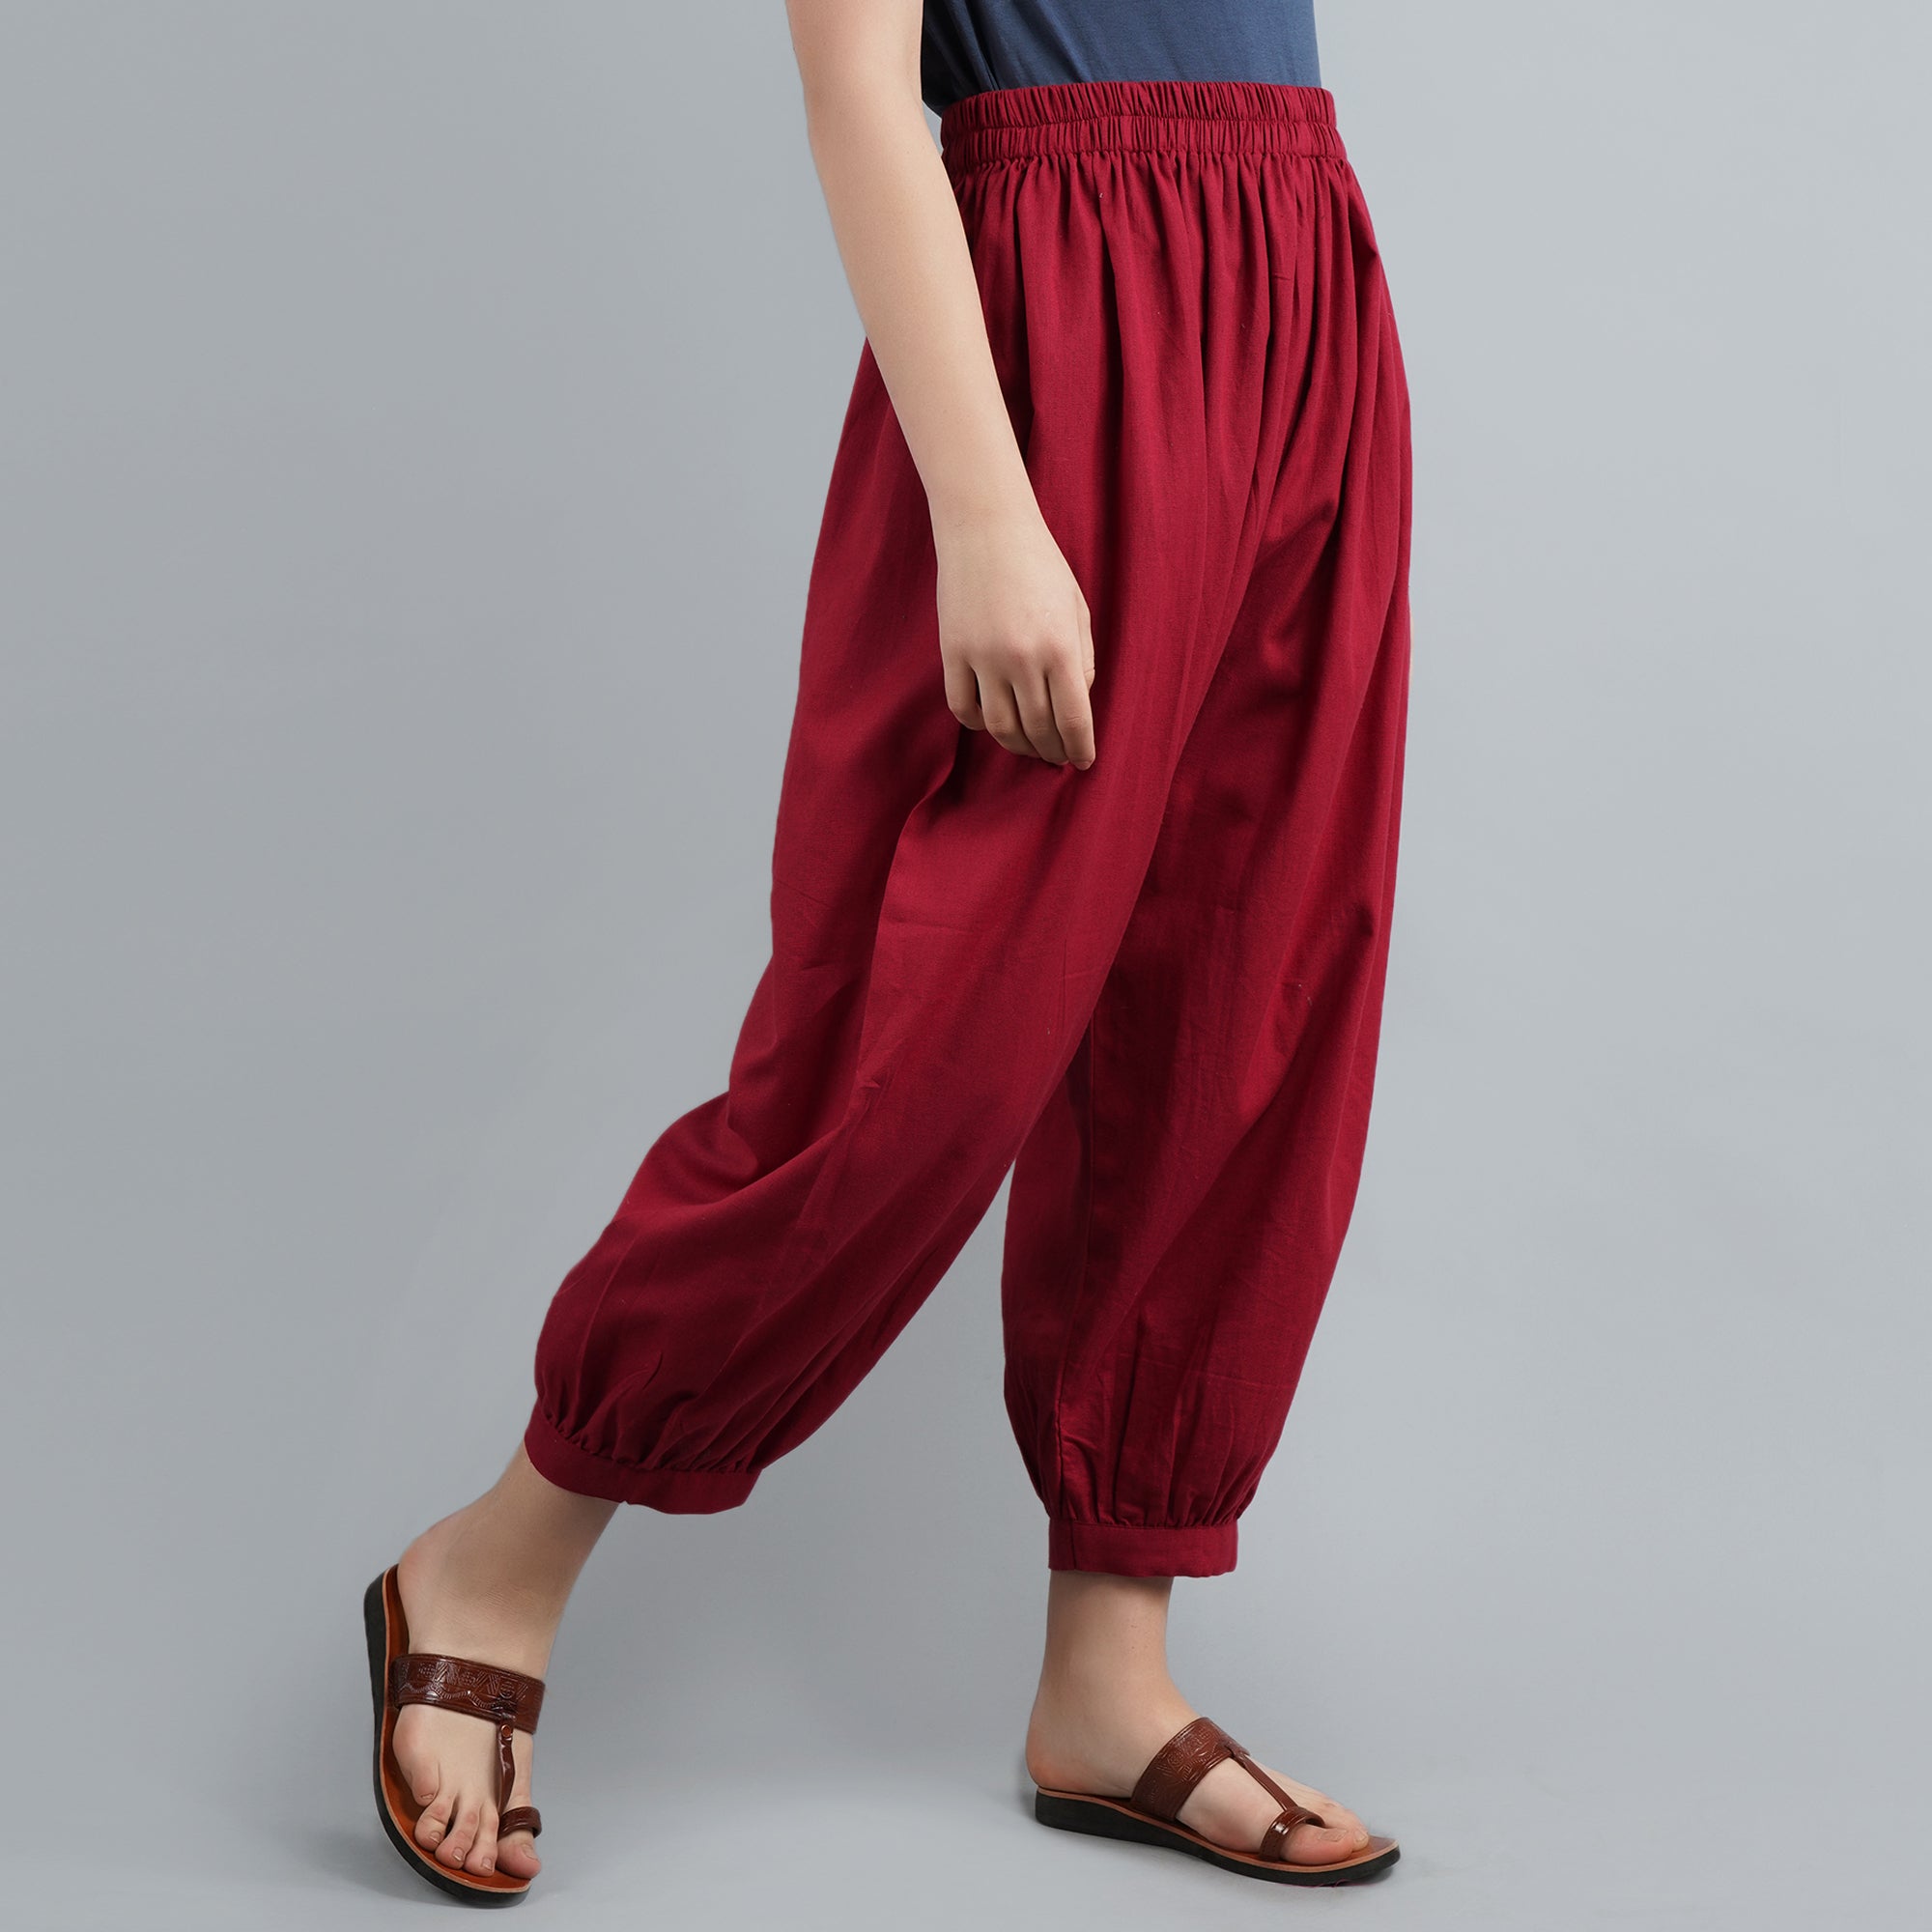 Dixie Shop Online Trousers - Women's clothing Sito Ufficiale